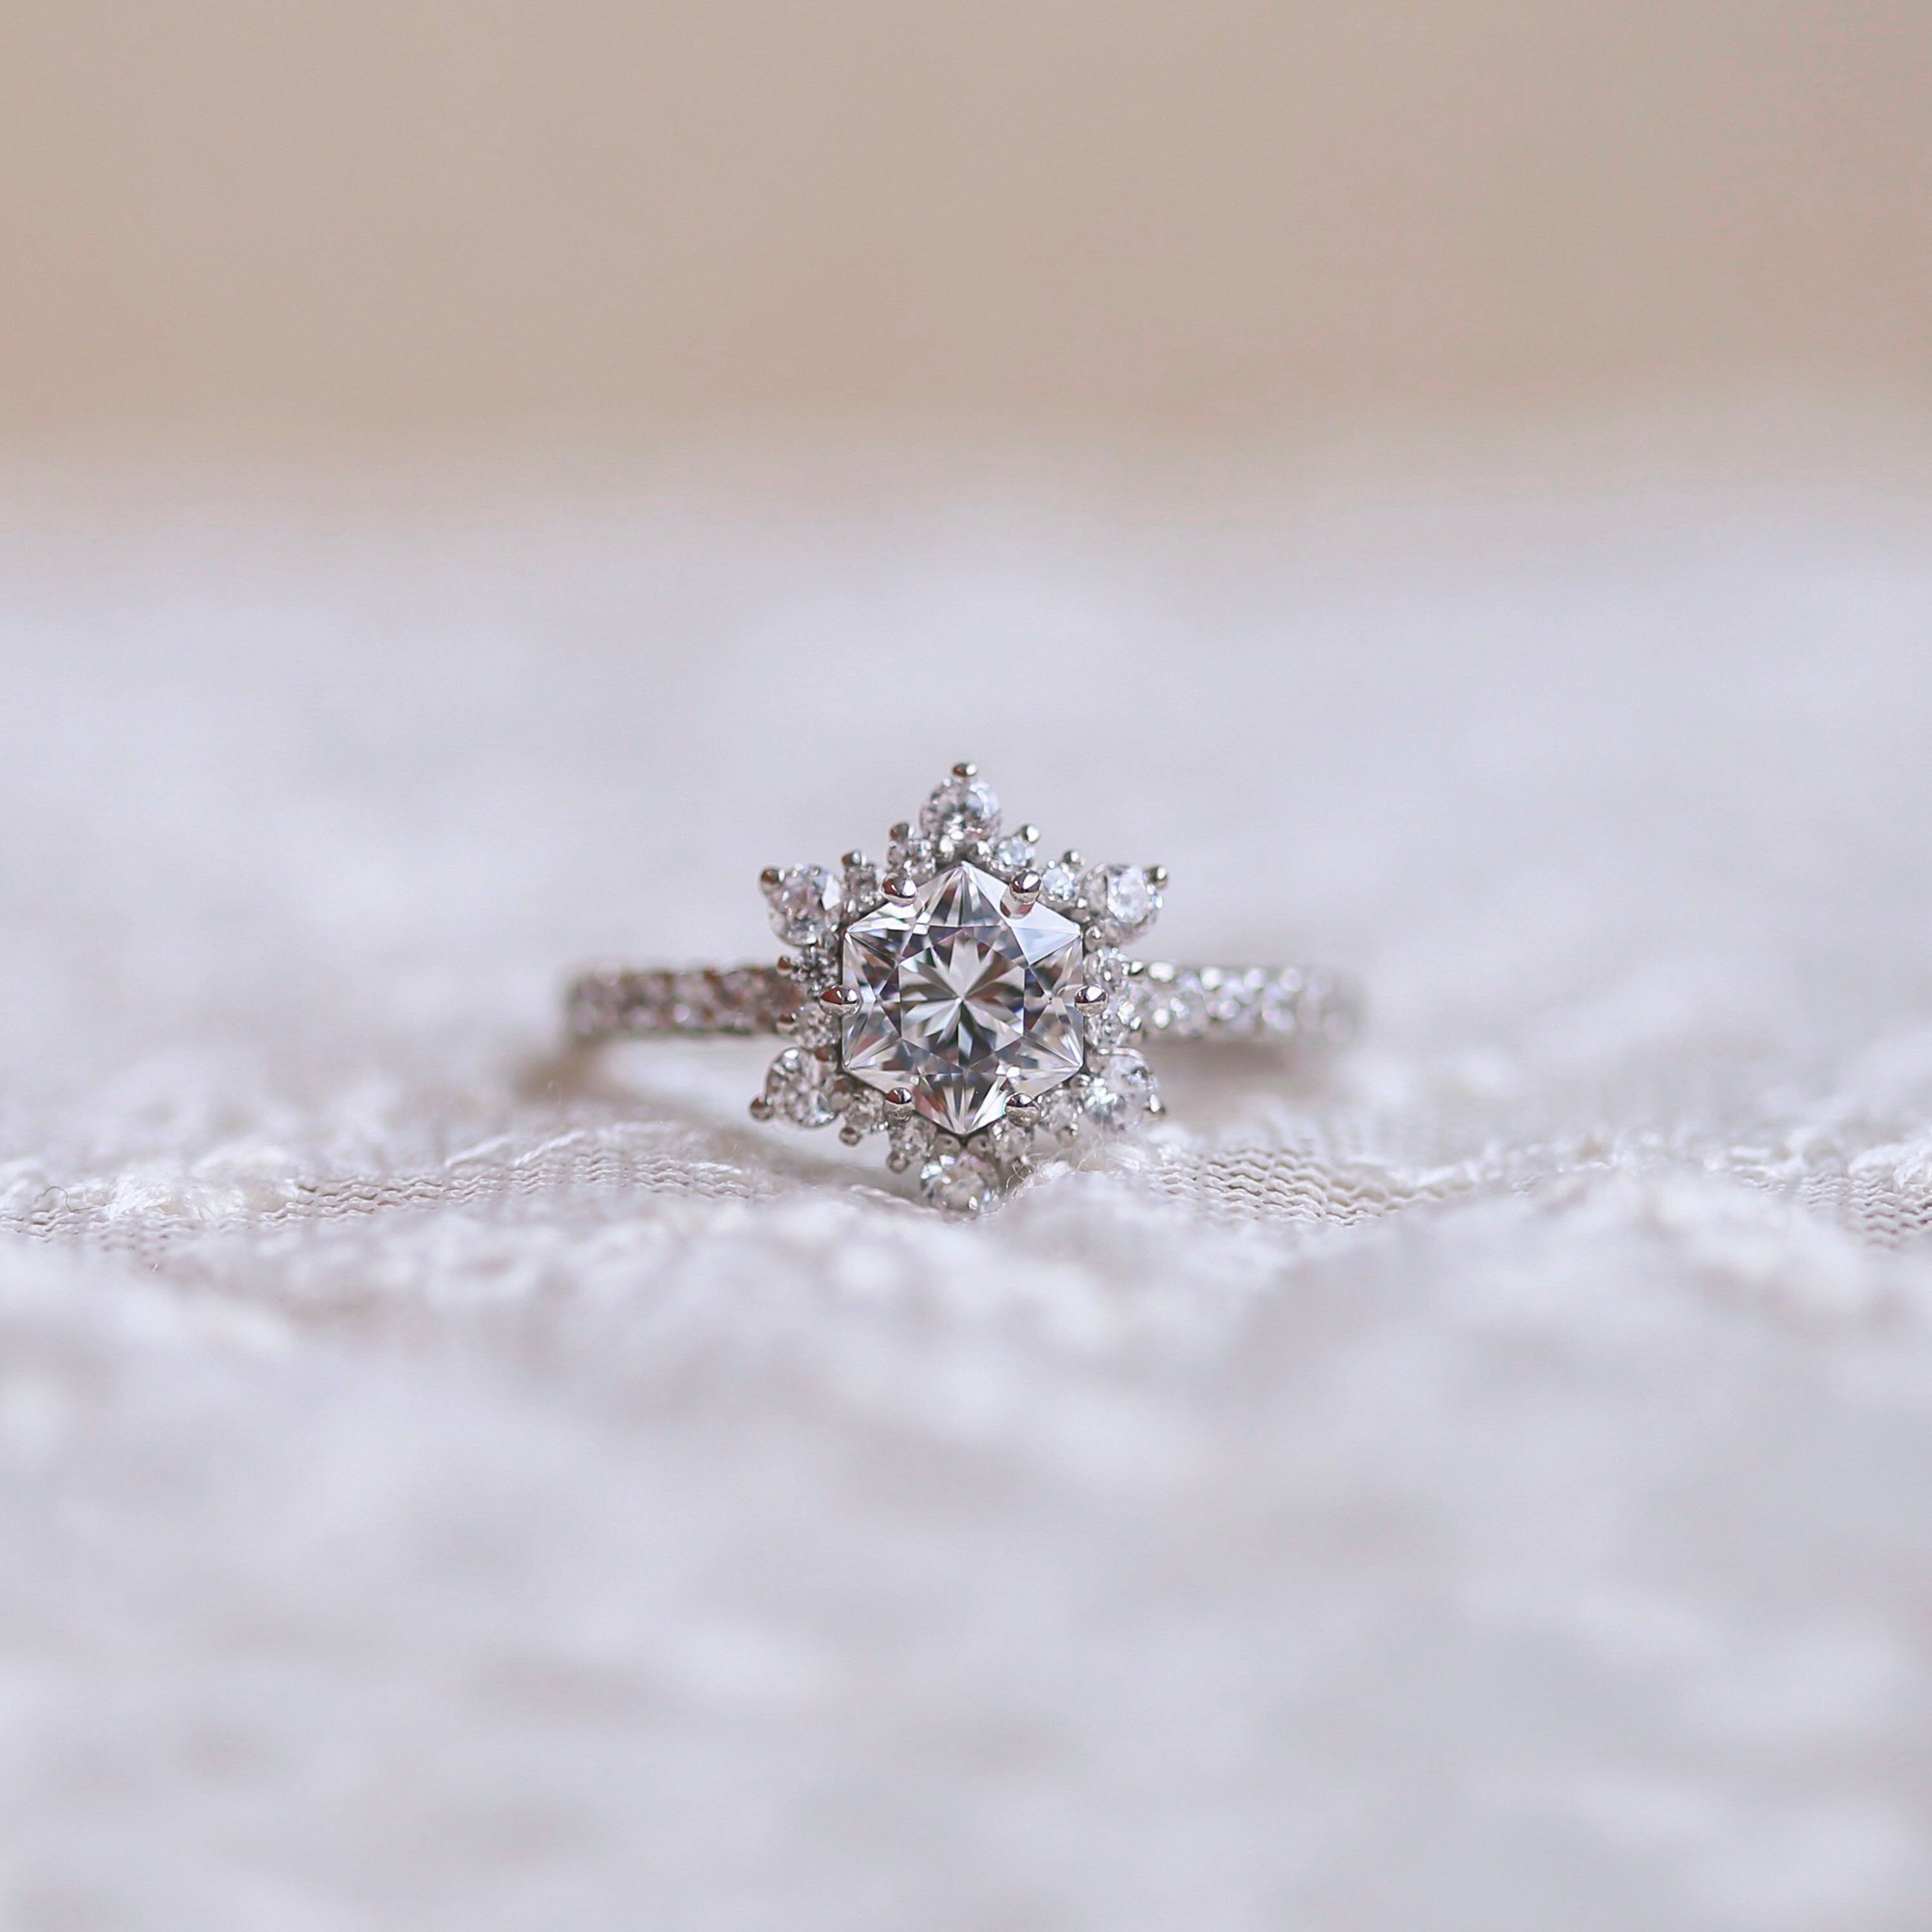 Snowflake solitaire pave ring from tedandmag